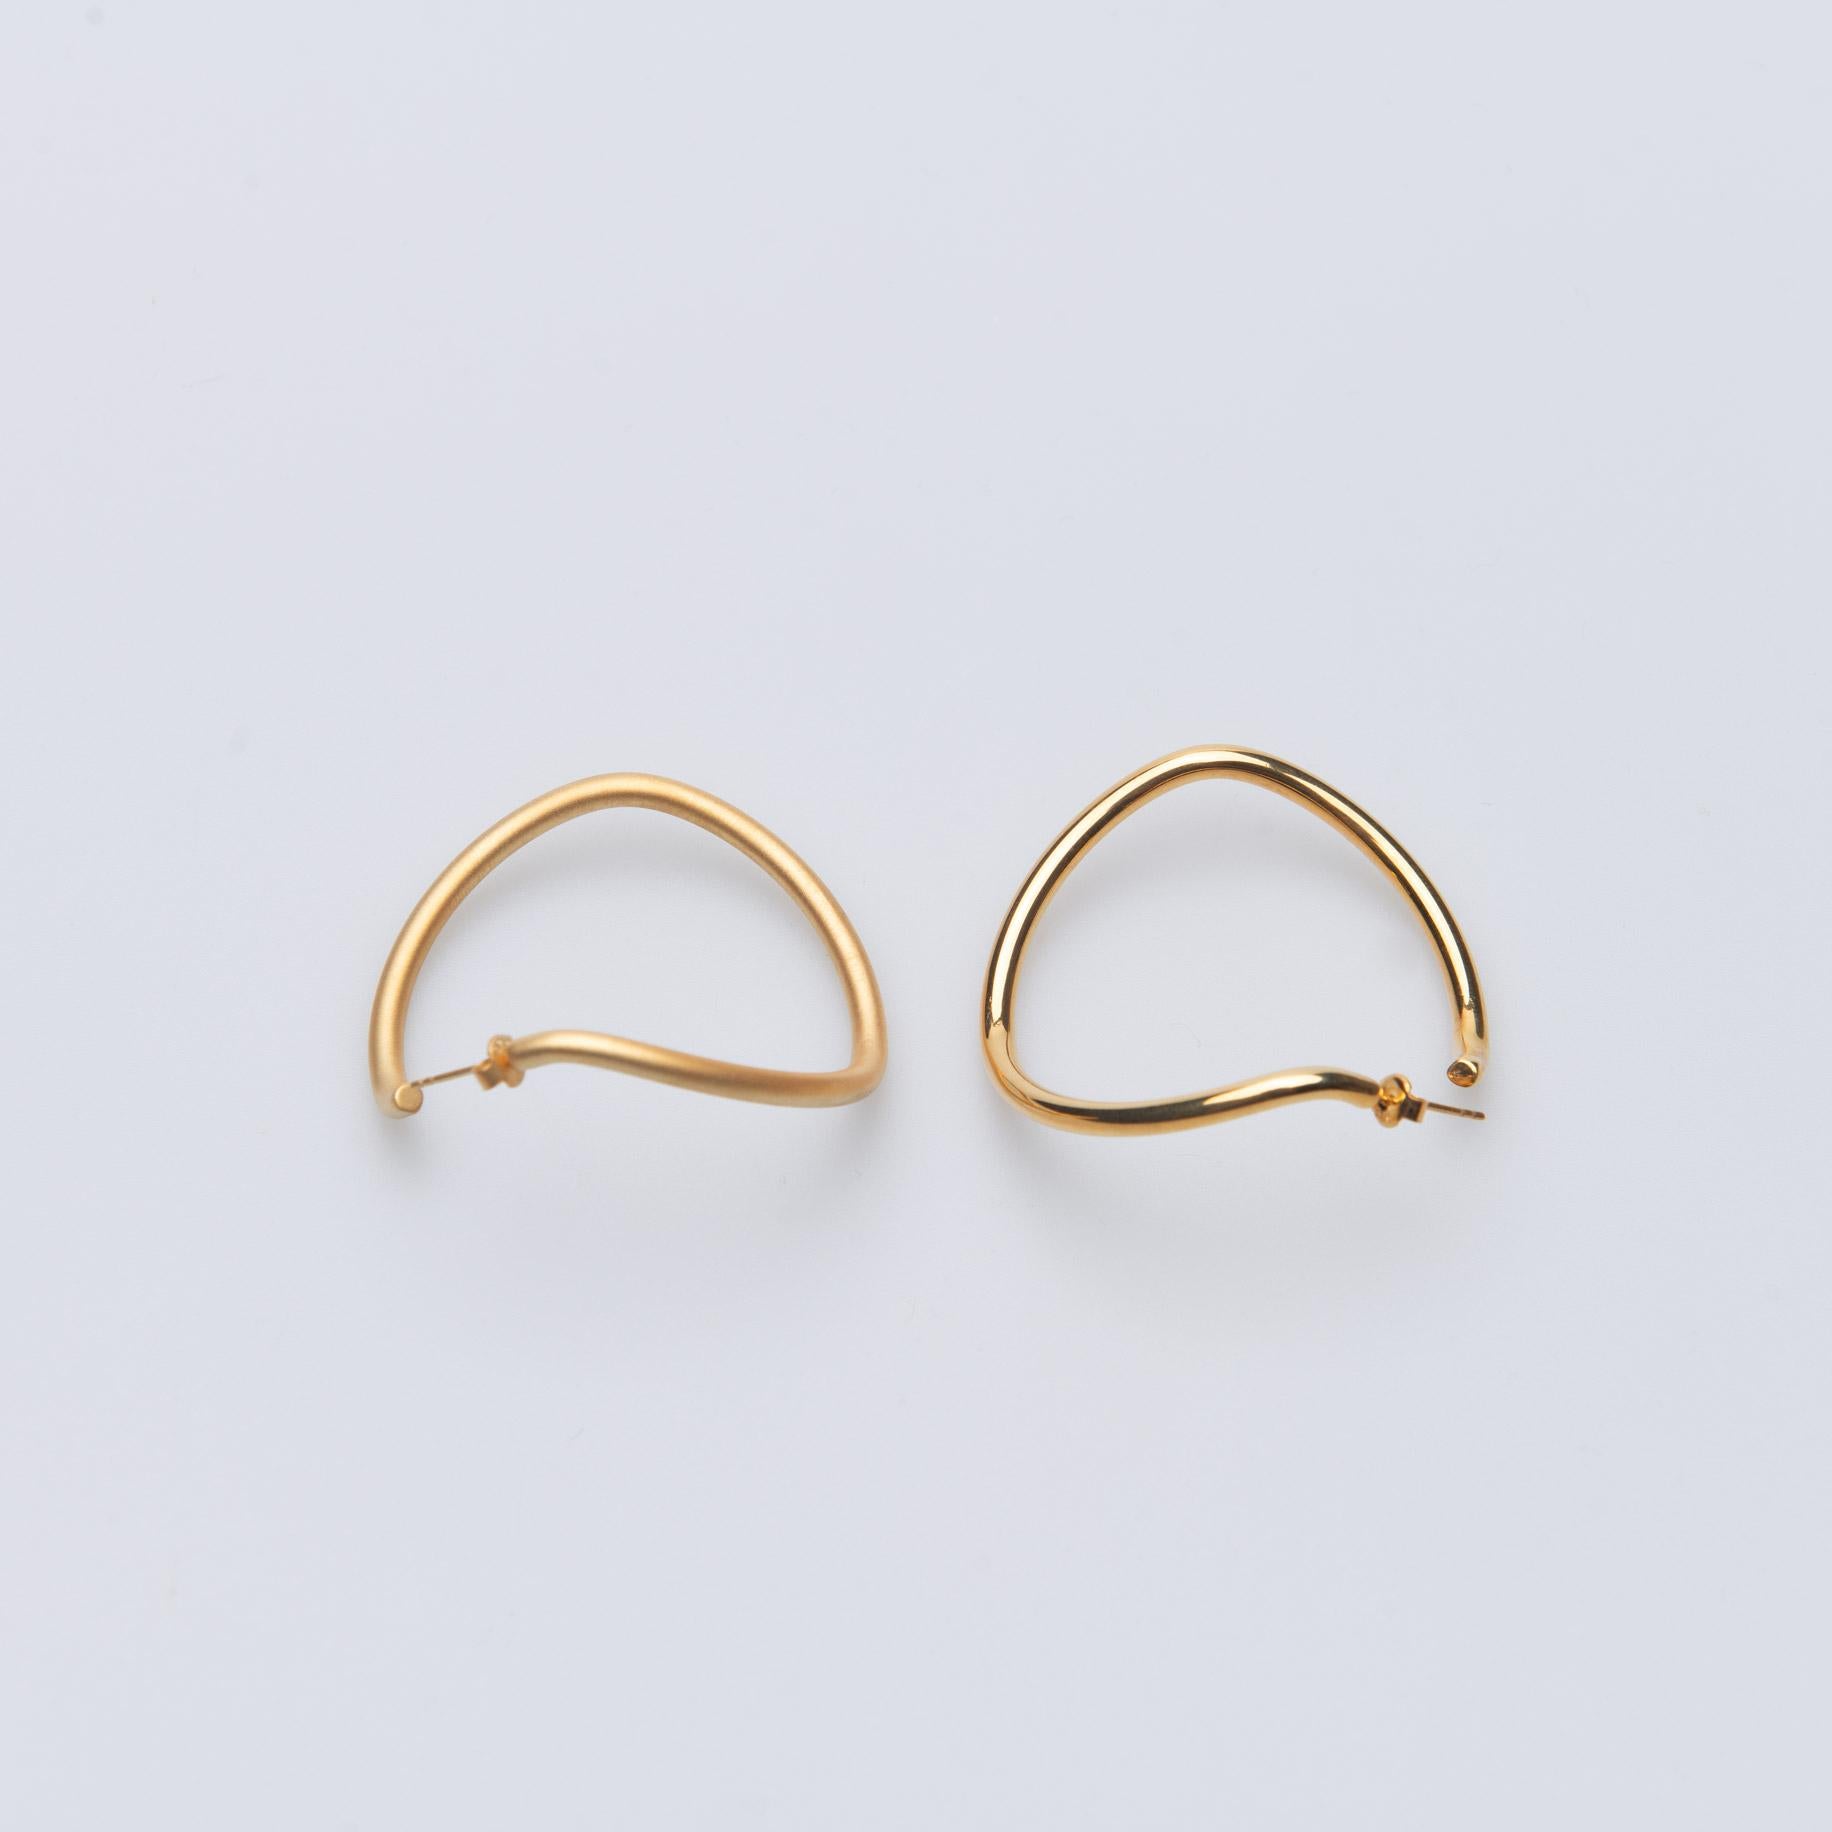 - Shaped in an elegant S curve, present a duo of contemporary art pieces: one flaunting a matte finish and the other dazzling in shiny gold plating, offering a striking contrast.
- Crafted from 925 sterling silver, available with a choice of